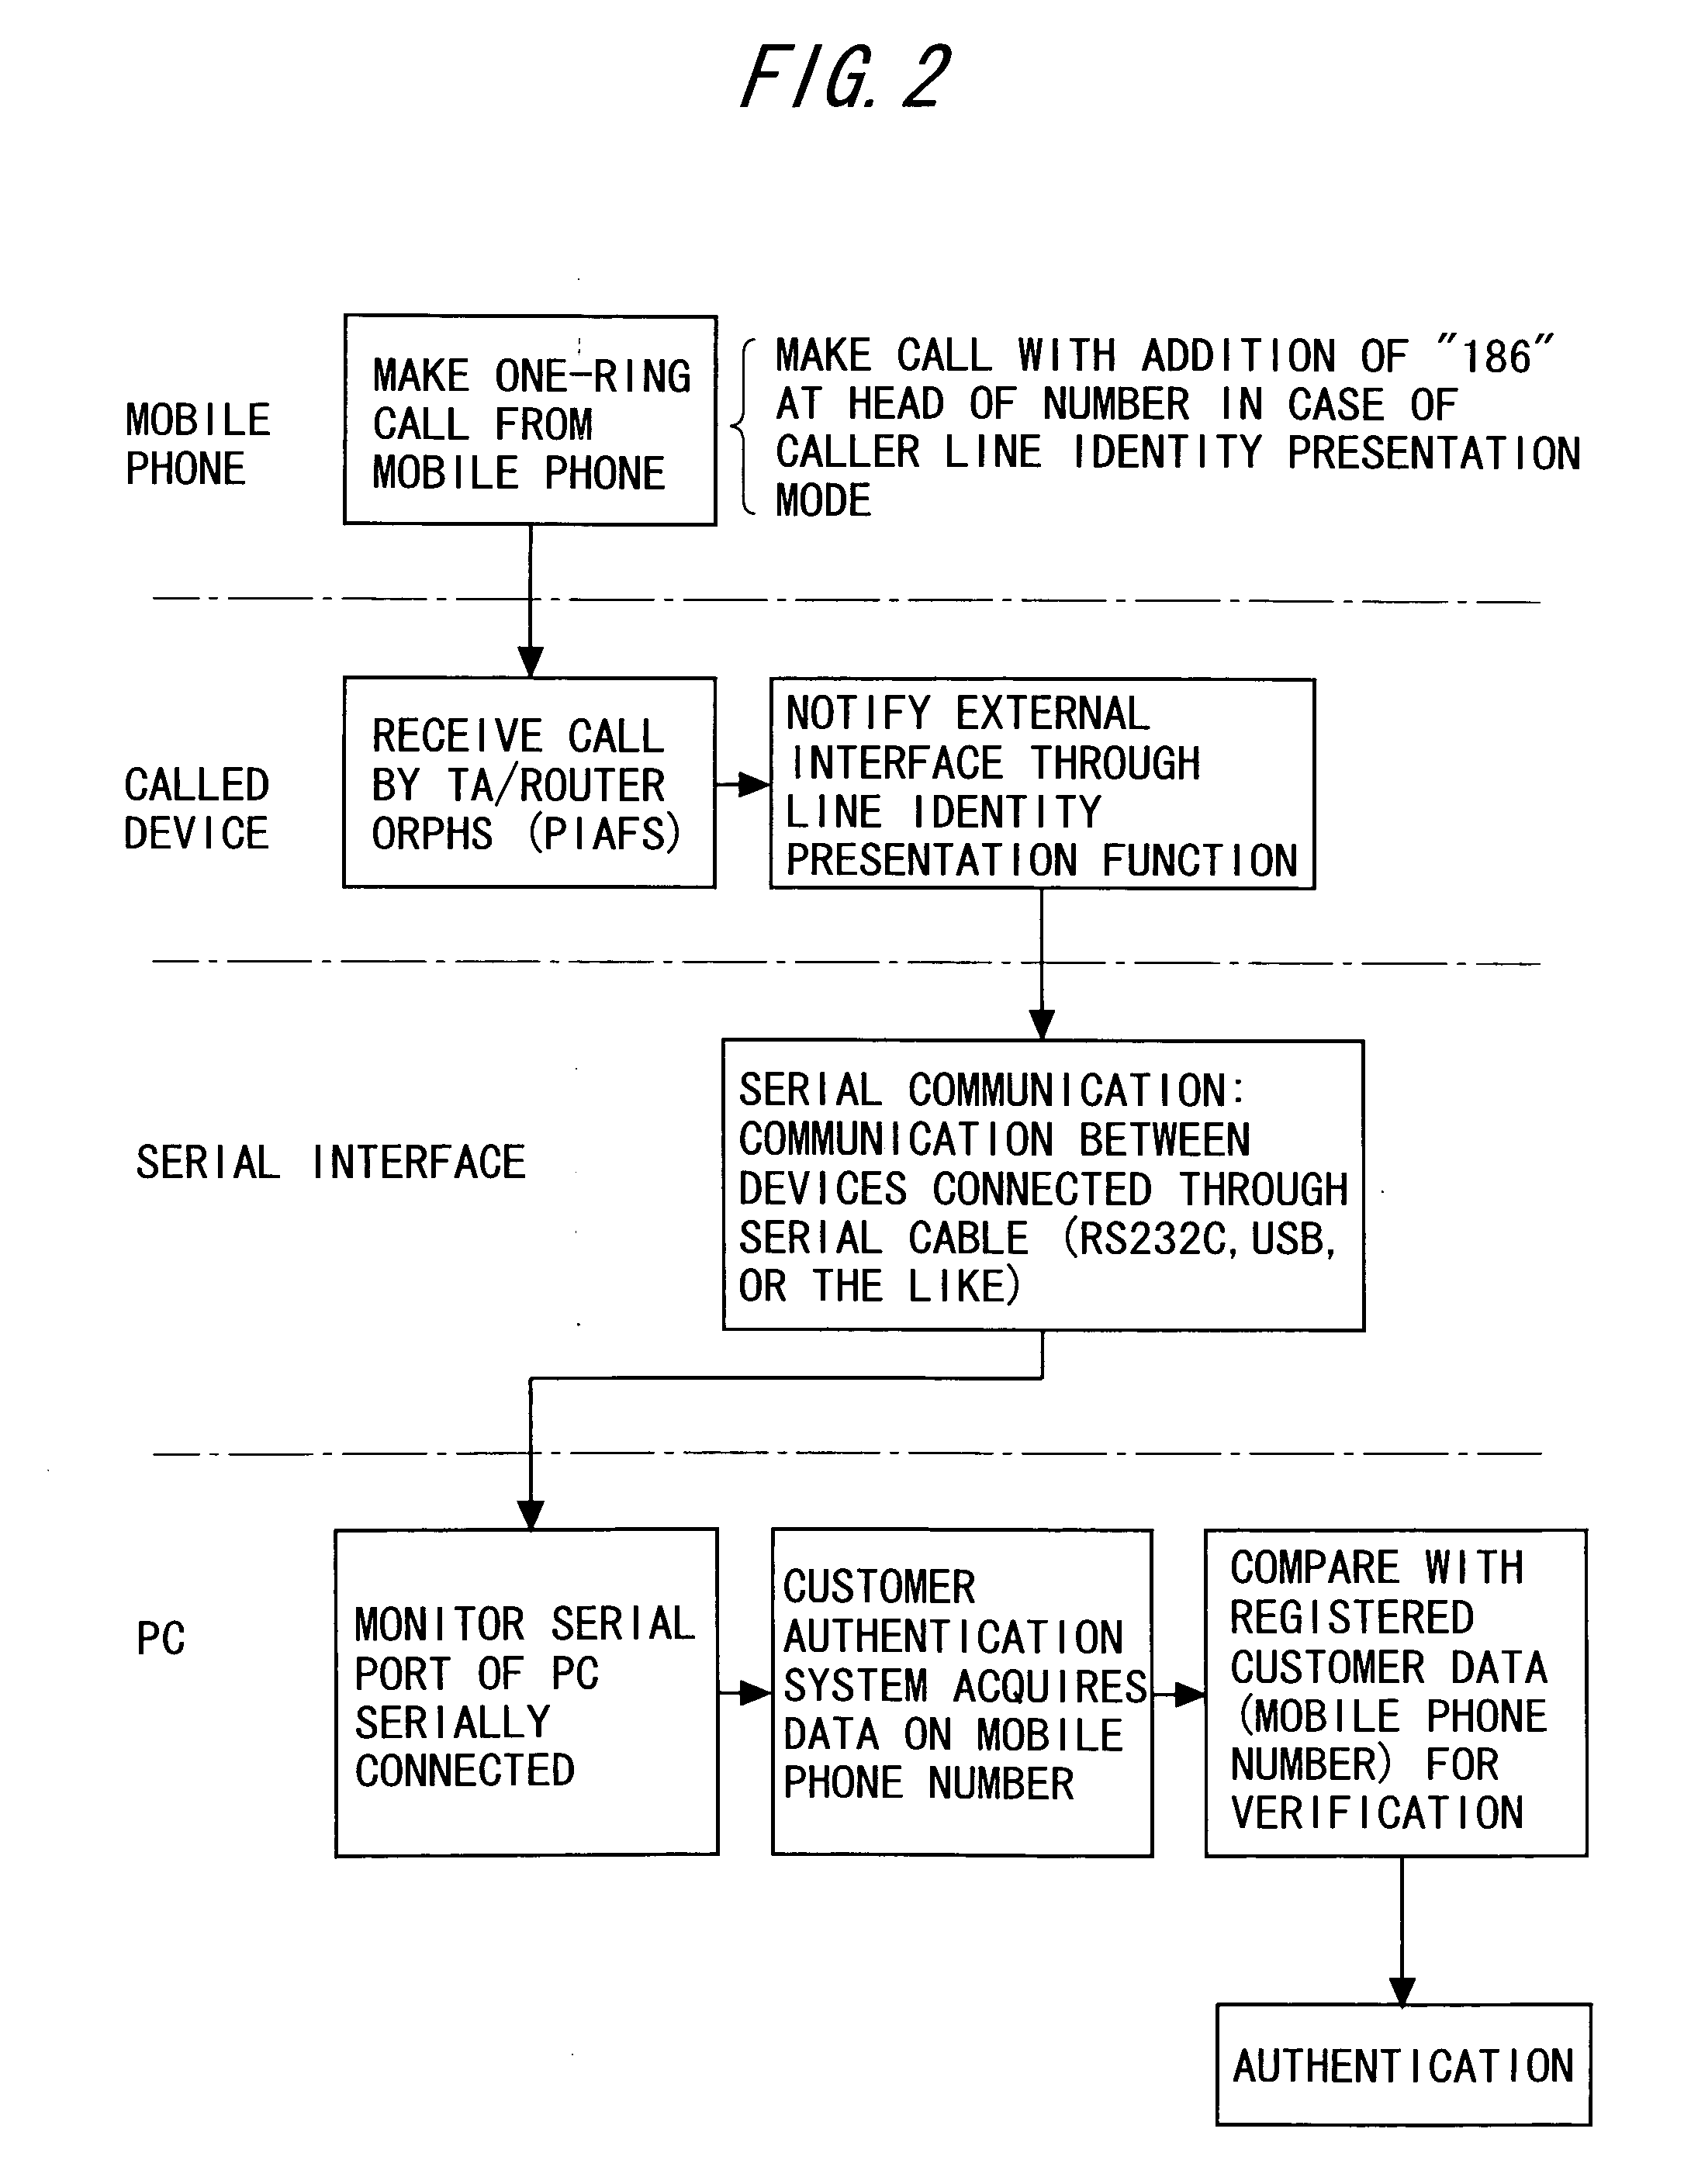 Member authentication system